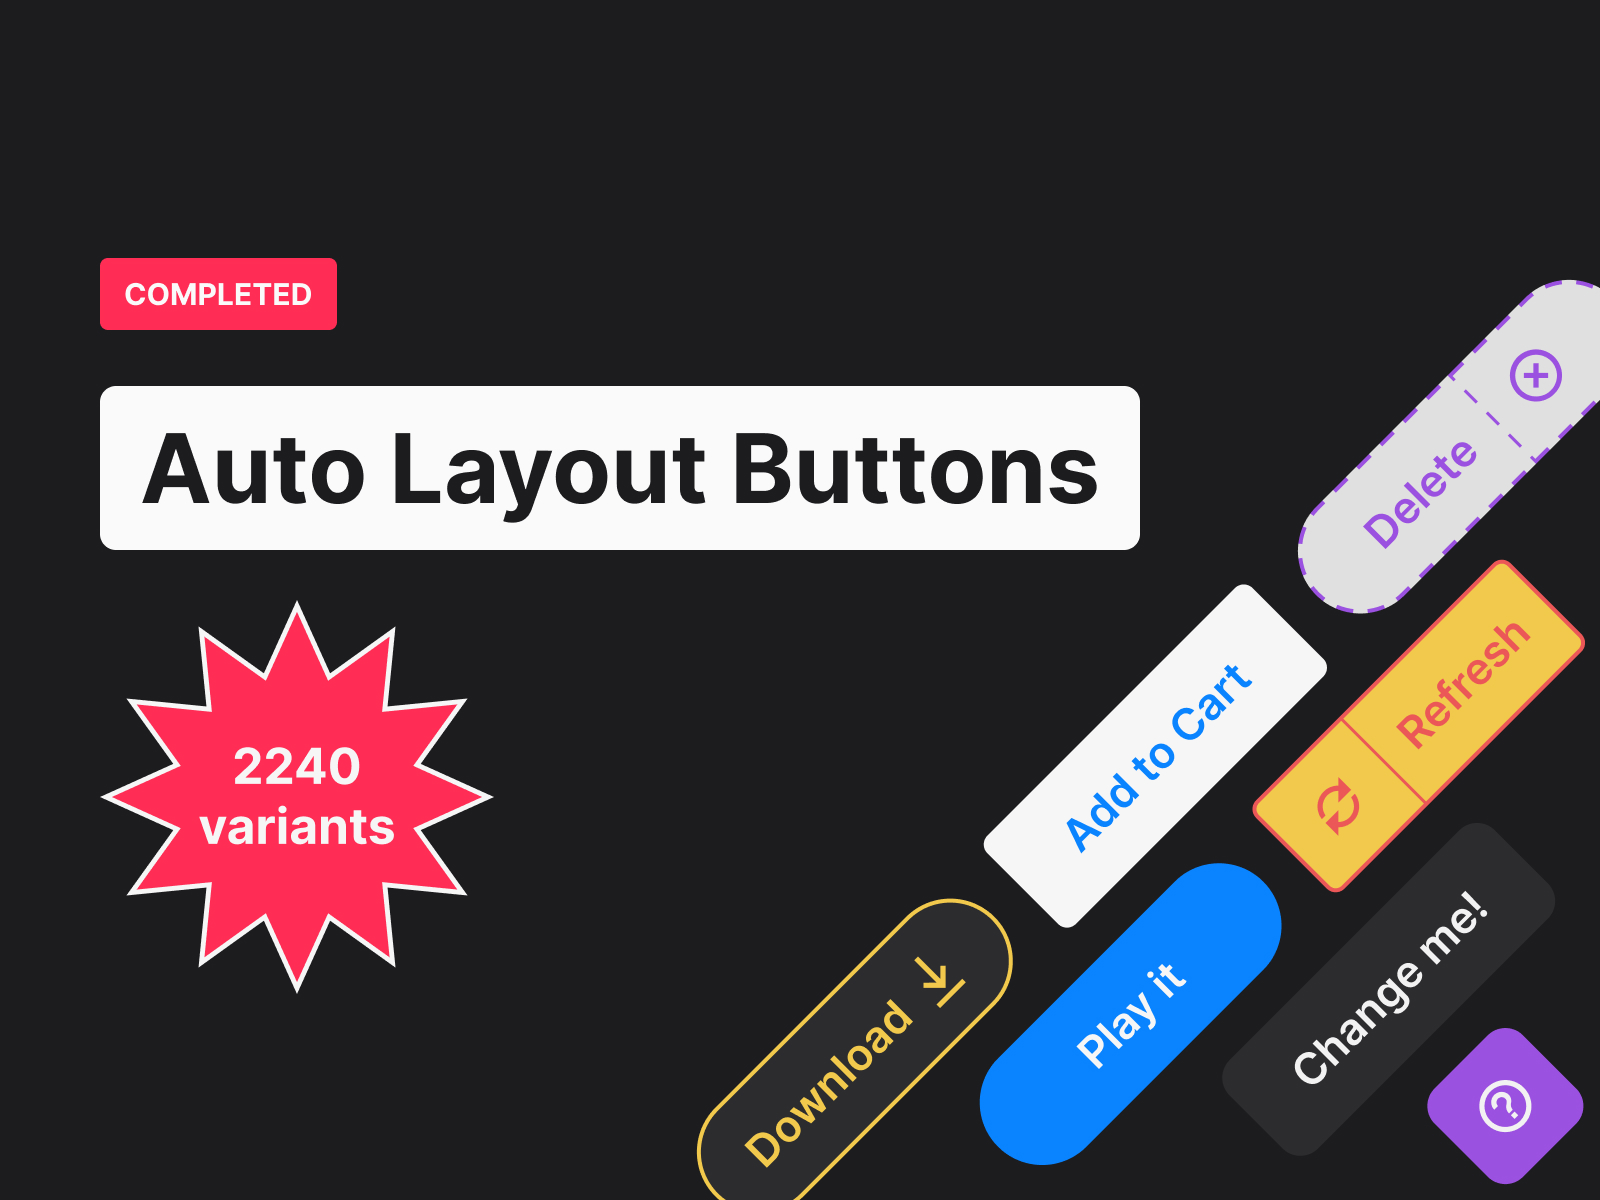 Auto Layout Buttons